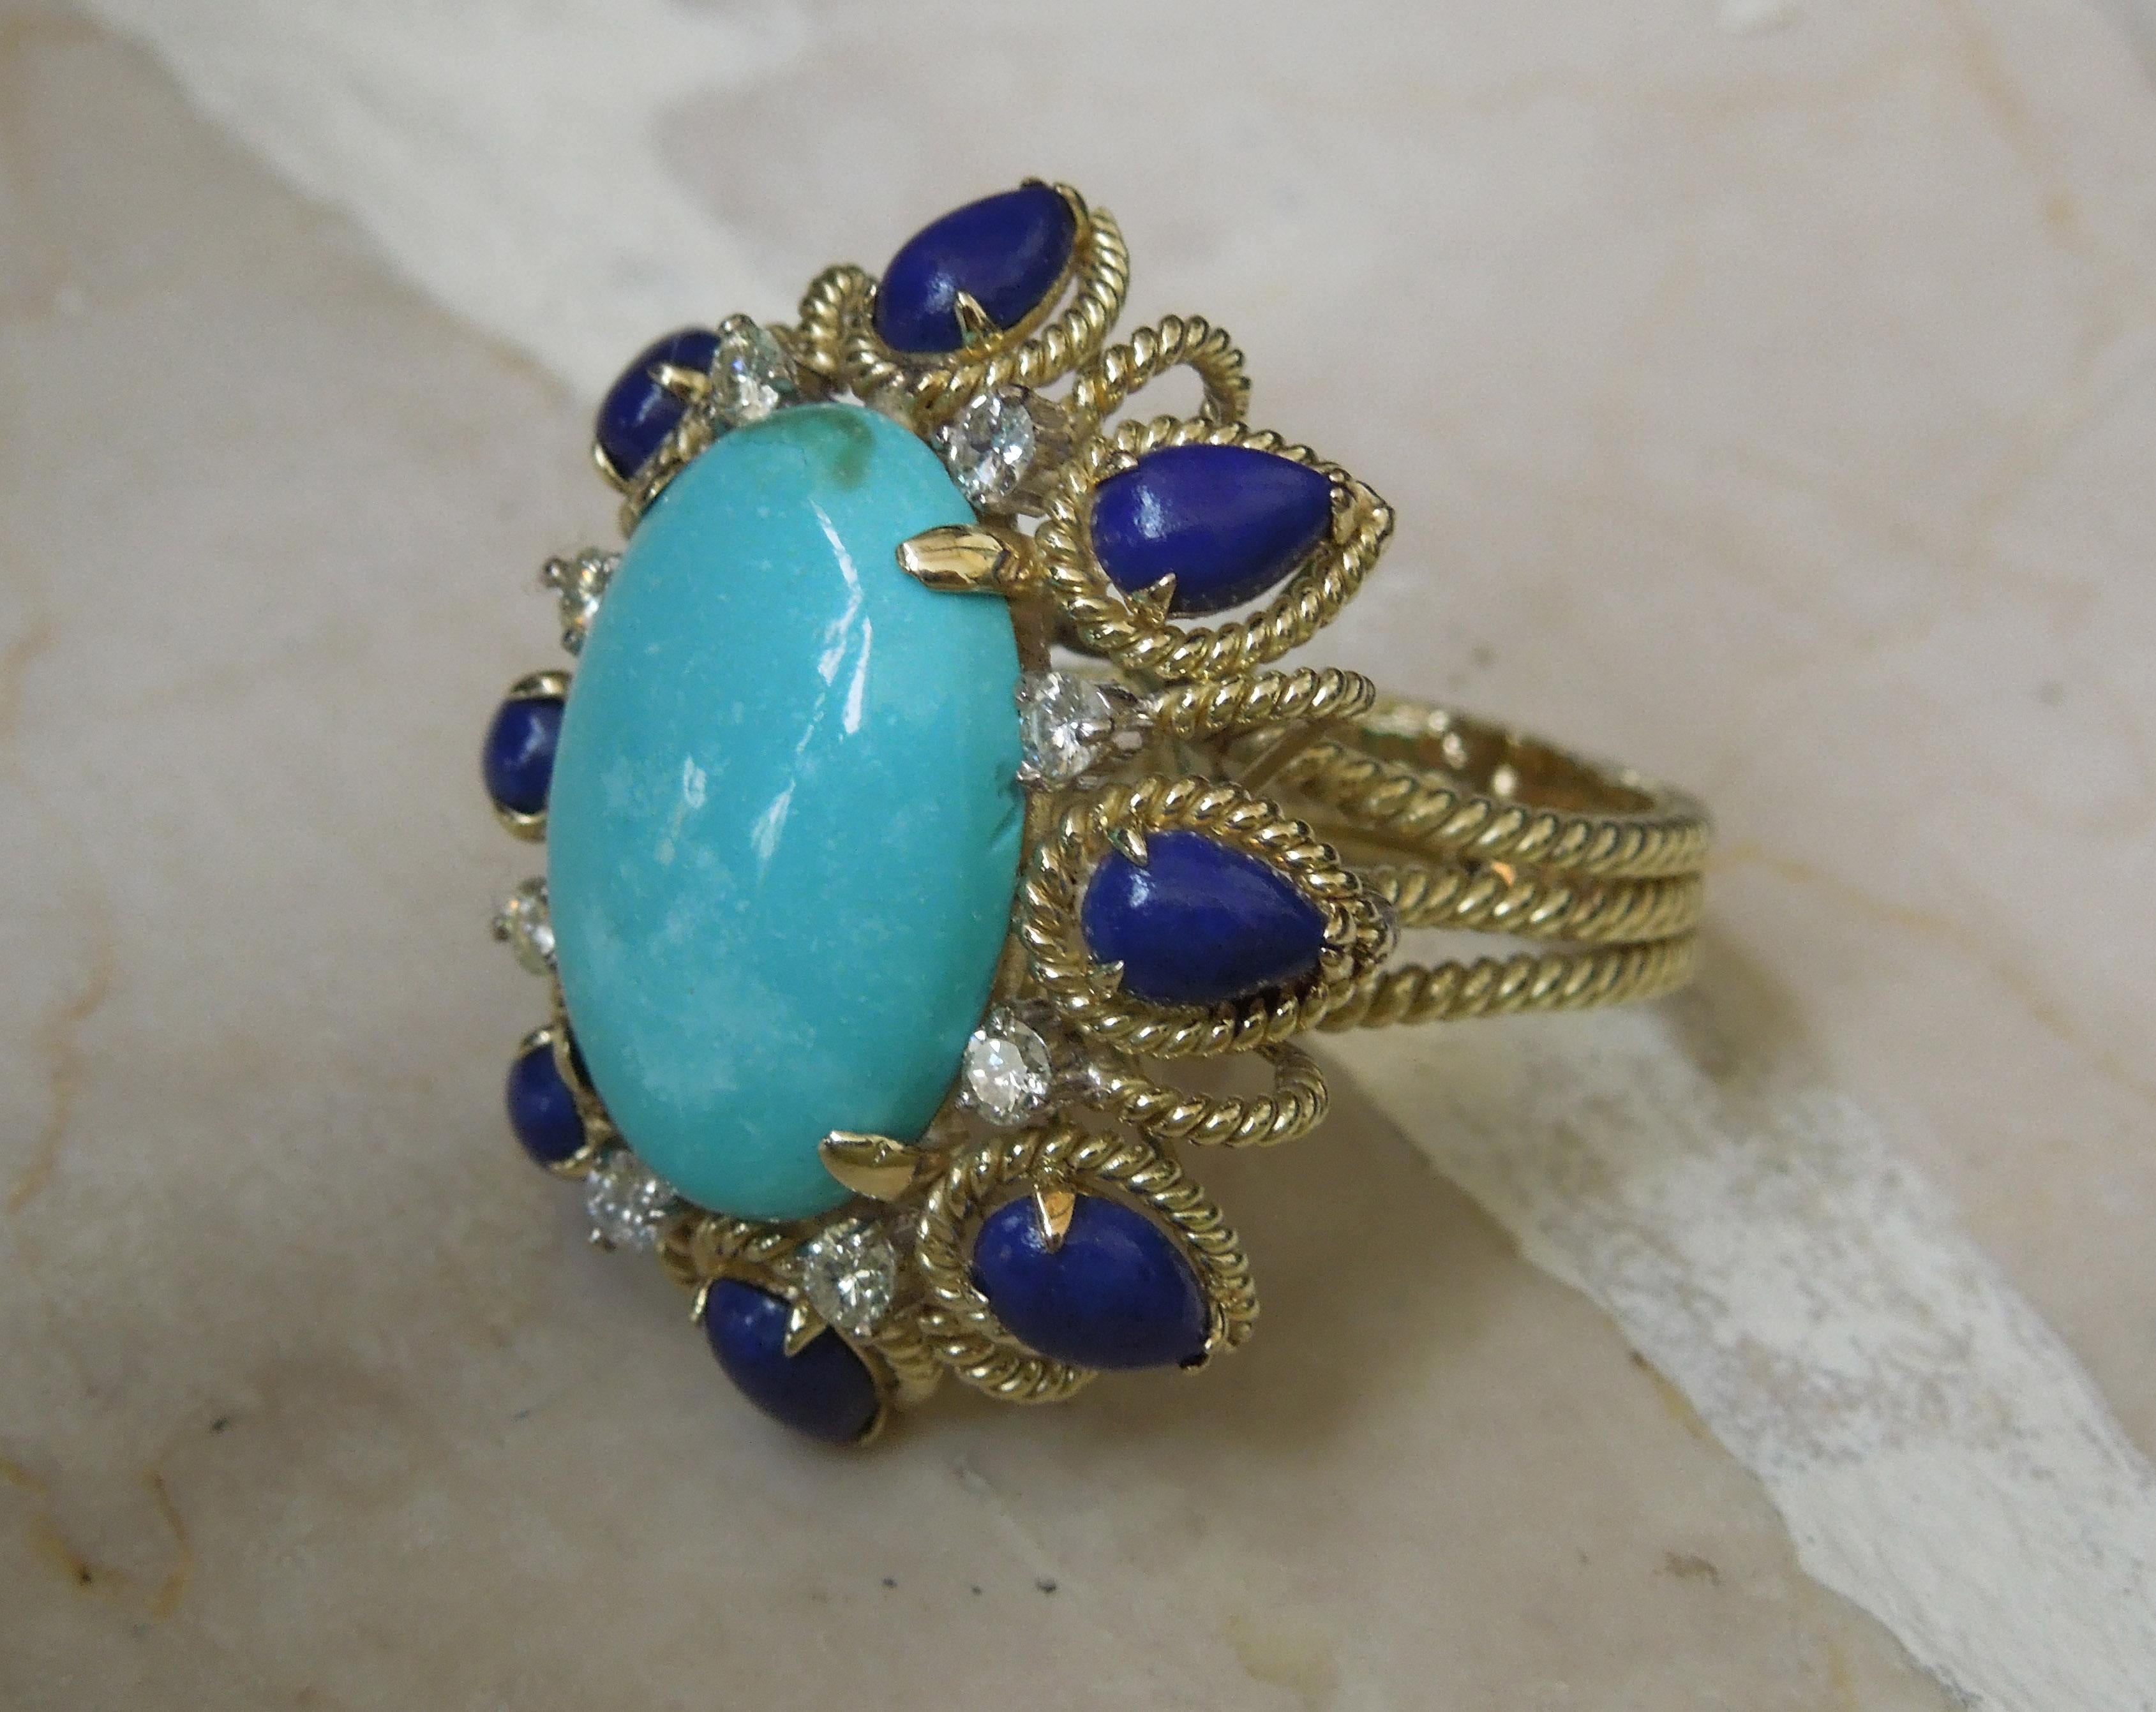 Featuring 1 Central Oval piece of Natural Turquoise at approximately 20mm x 13.3mm, secured in 4 Prongs. Surrounded by 8 Pear shaped pieces of Natural Lapis Lazuli, spaced with 8 Colorless Nearly Flawless to Slightly Included Round Brilliant cut